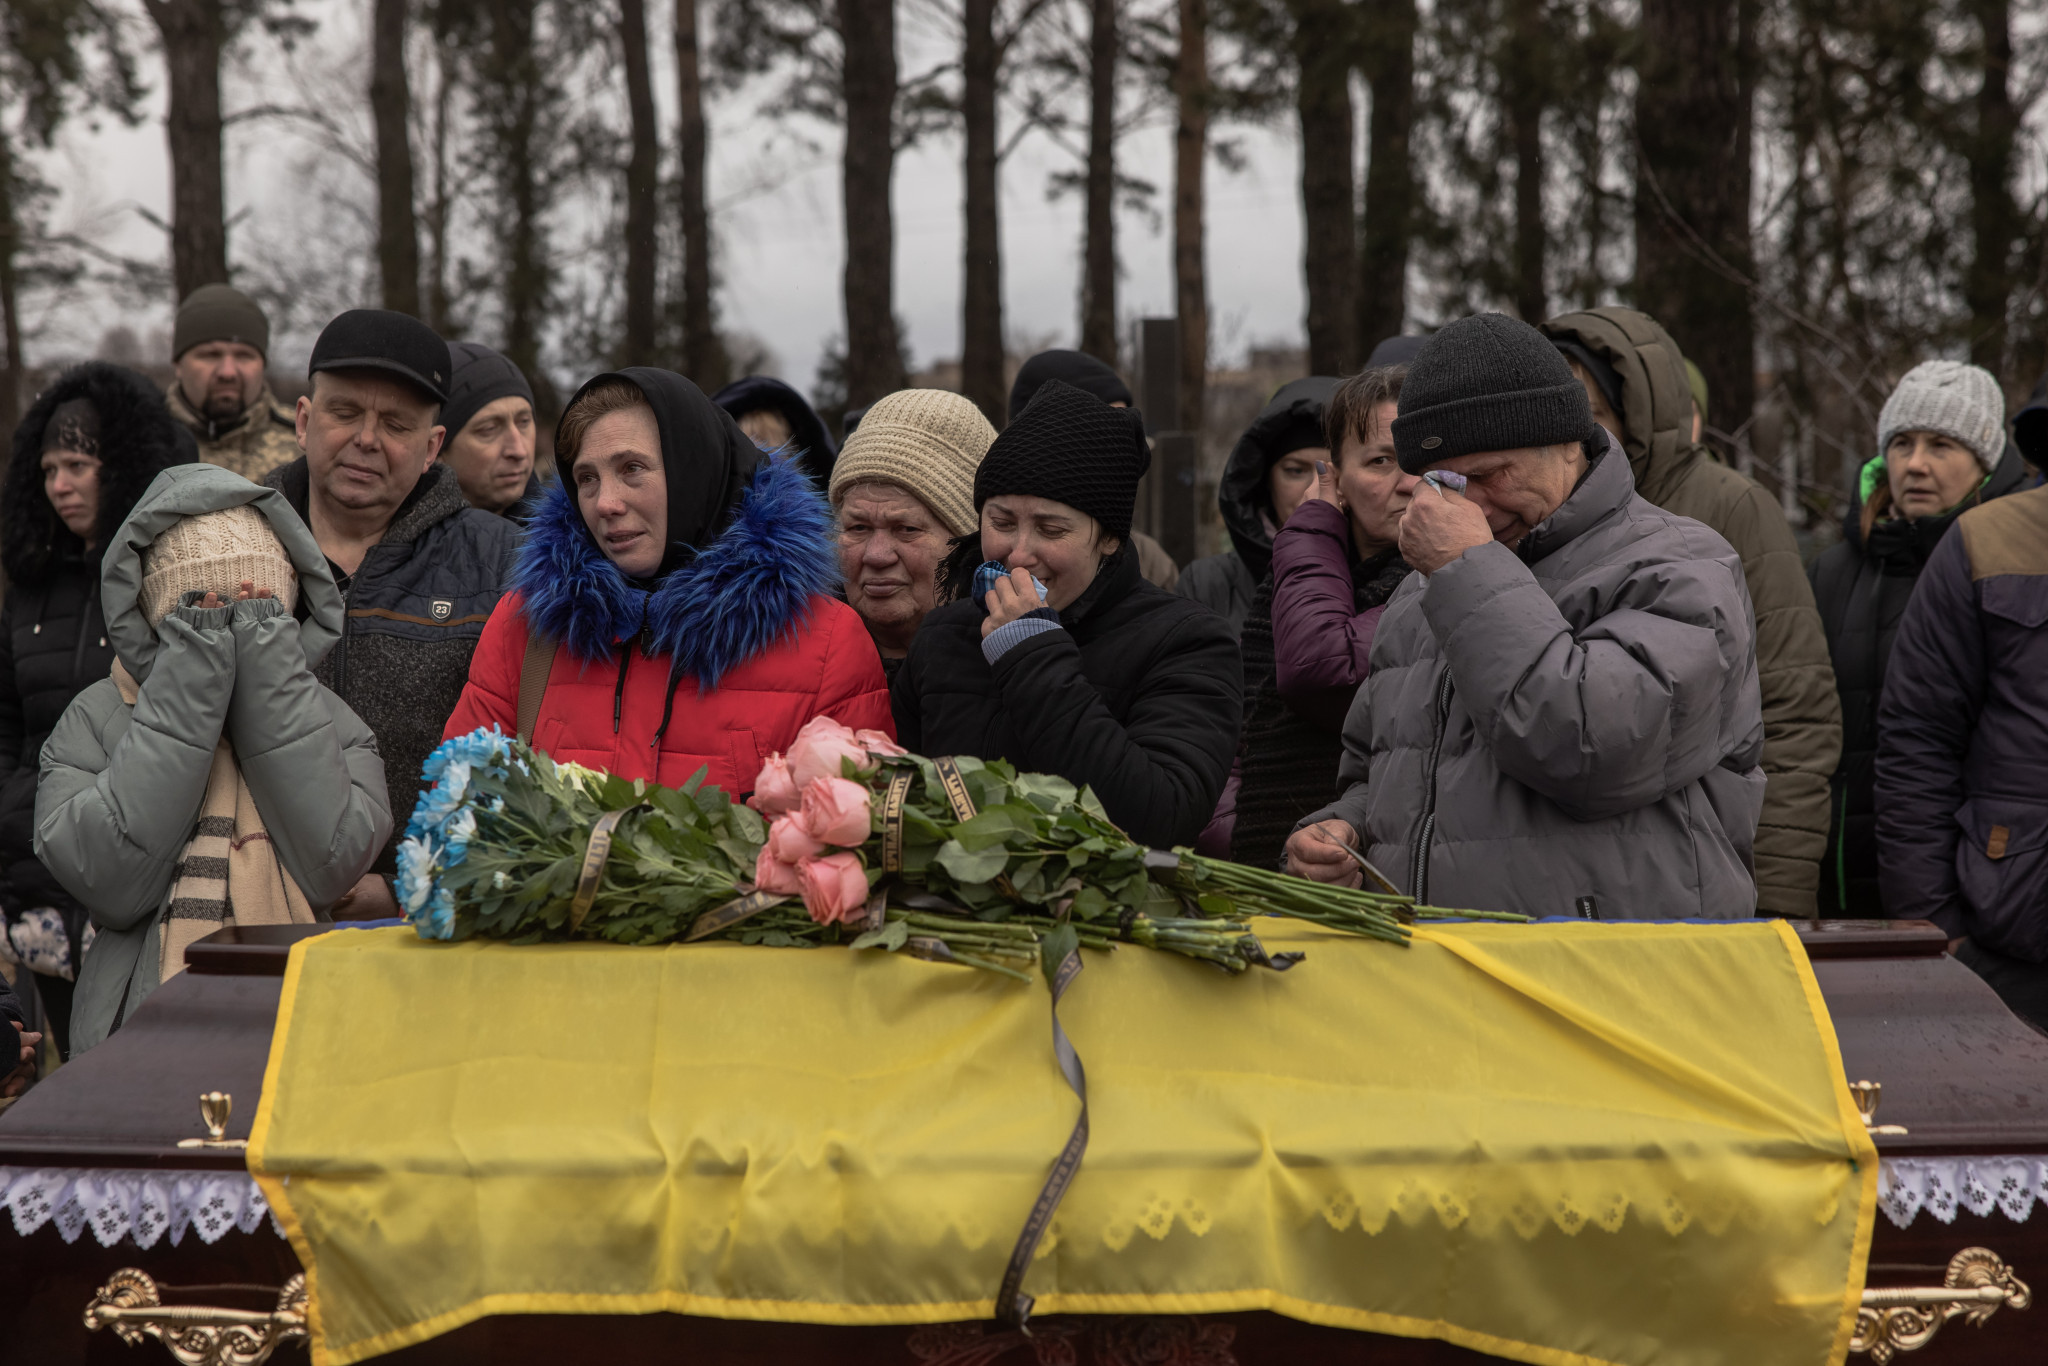 Relatives and friends grieve next to a coffin of Ukrainian serviceman Yurii Kulyk, who was killed in battle at the age of 27 ©Getty Images